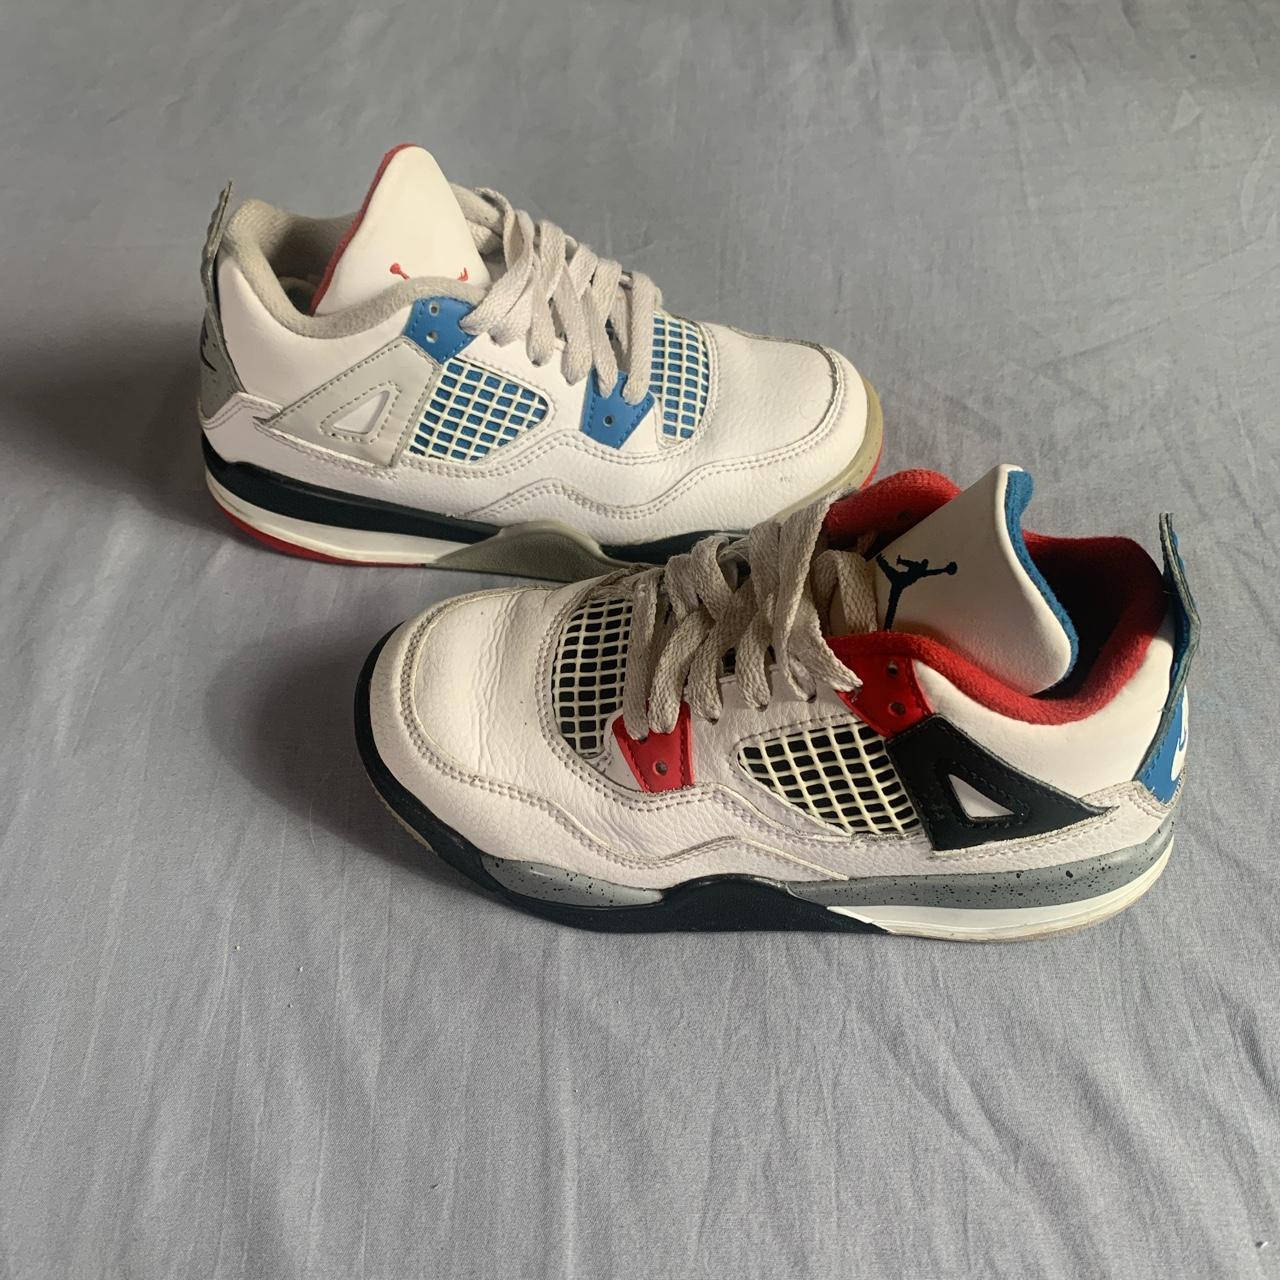 Jordan Men's Red and Blue Trainers (2)